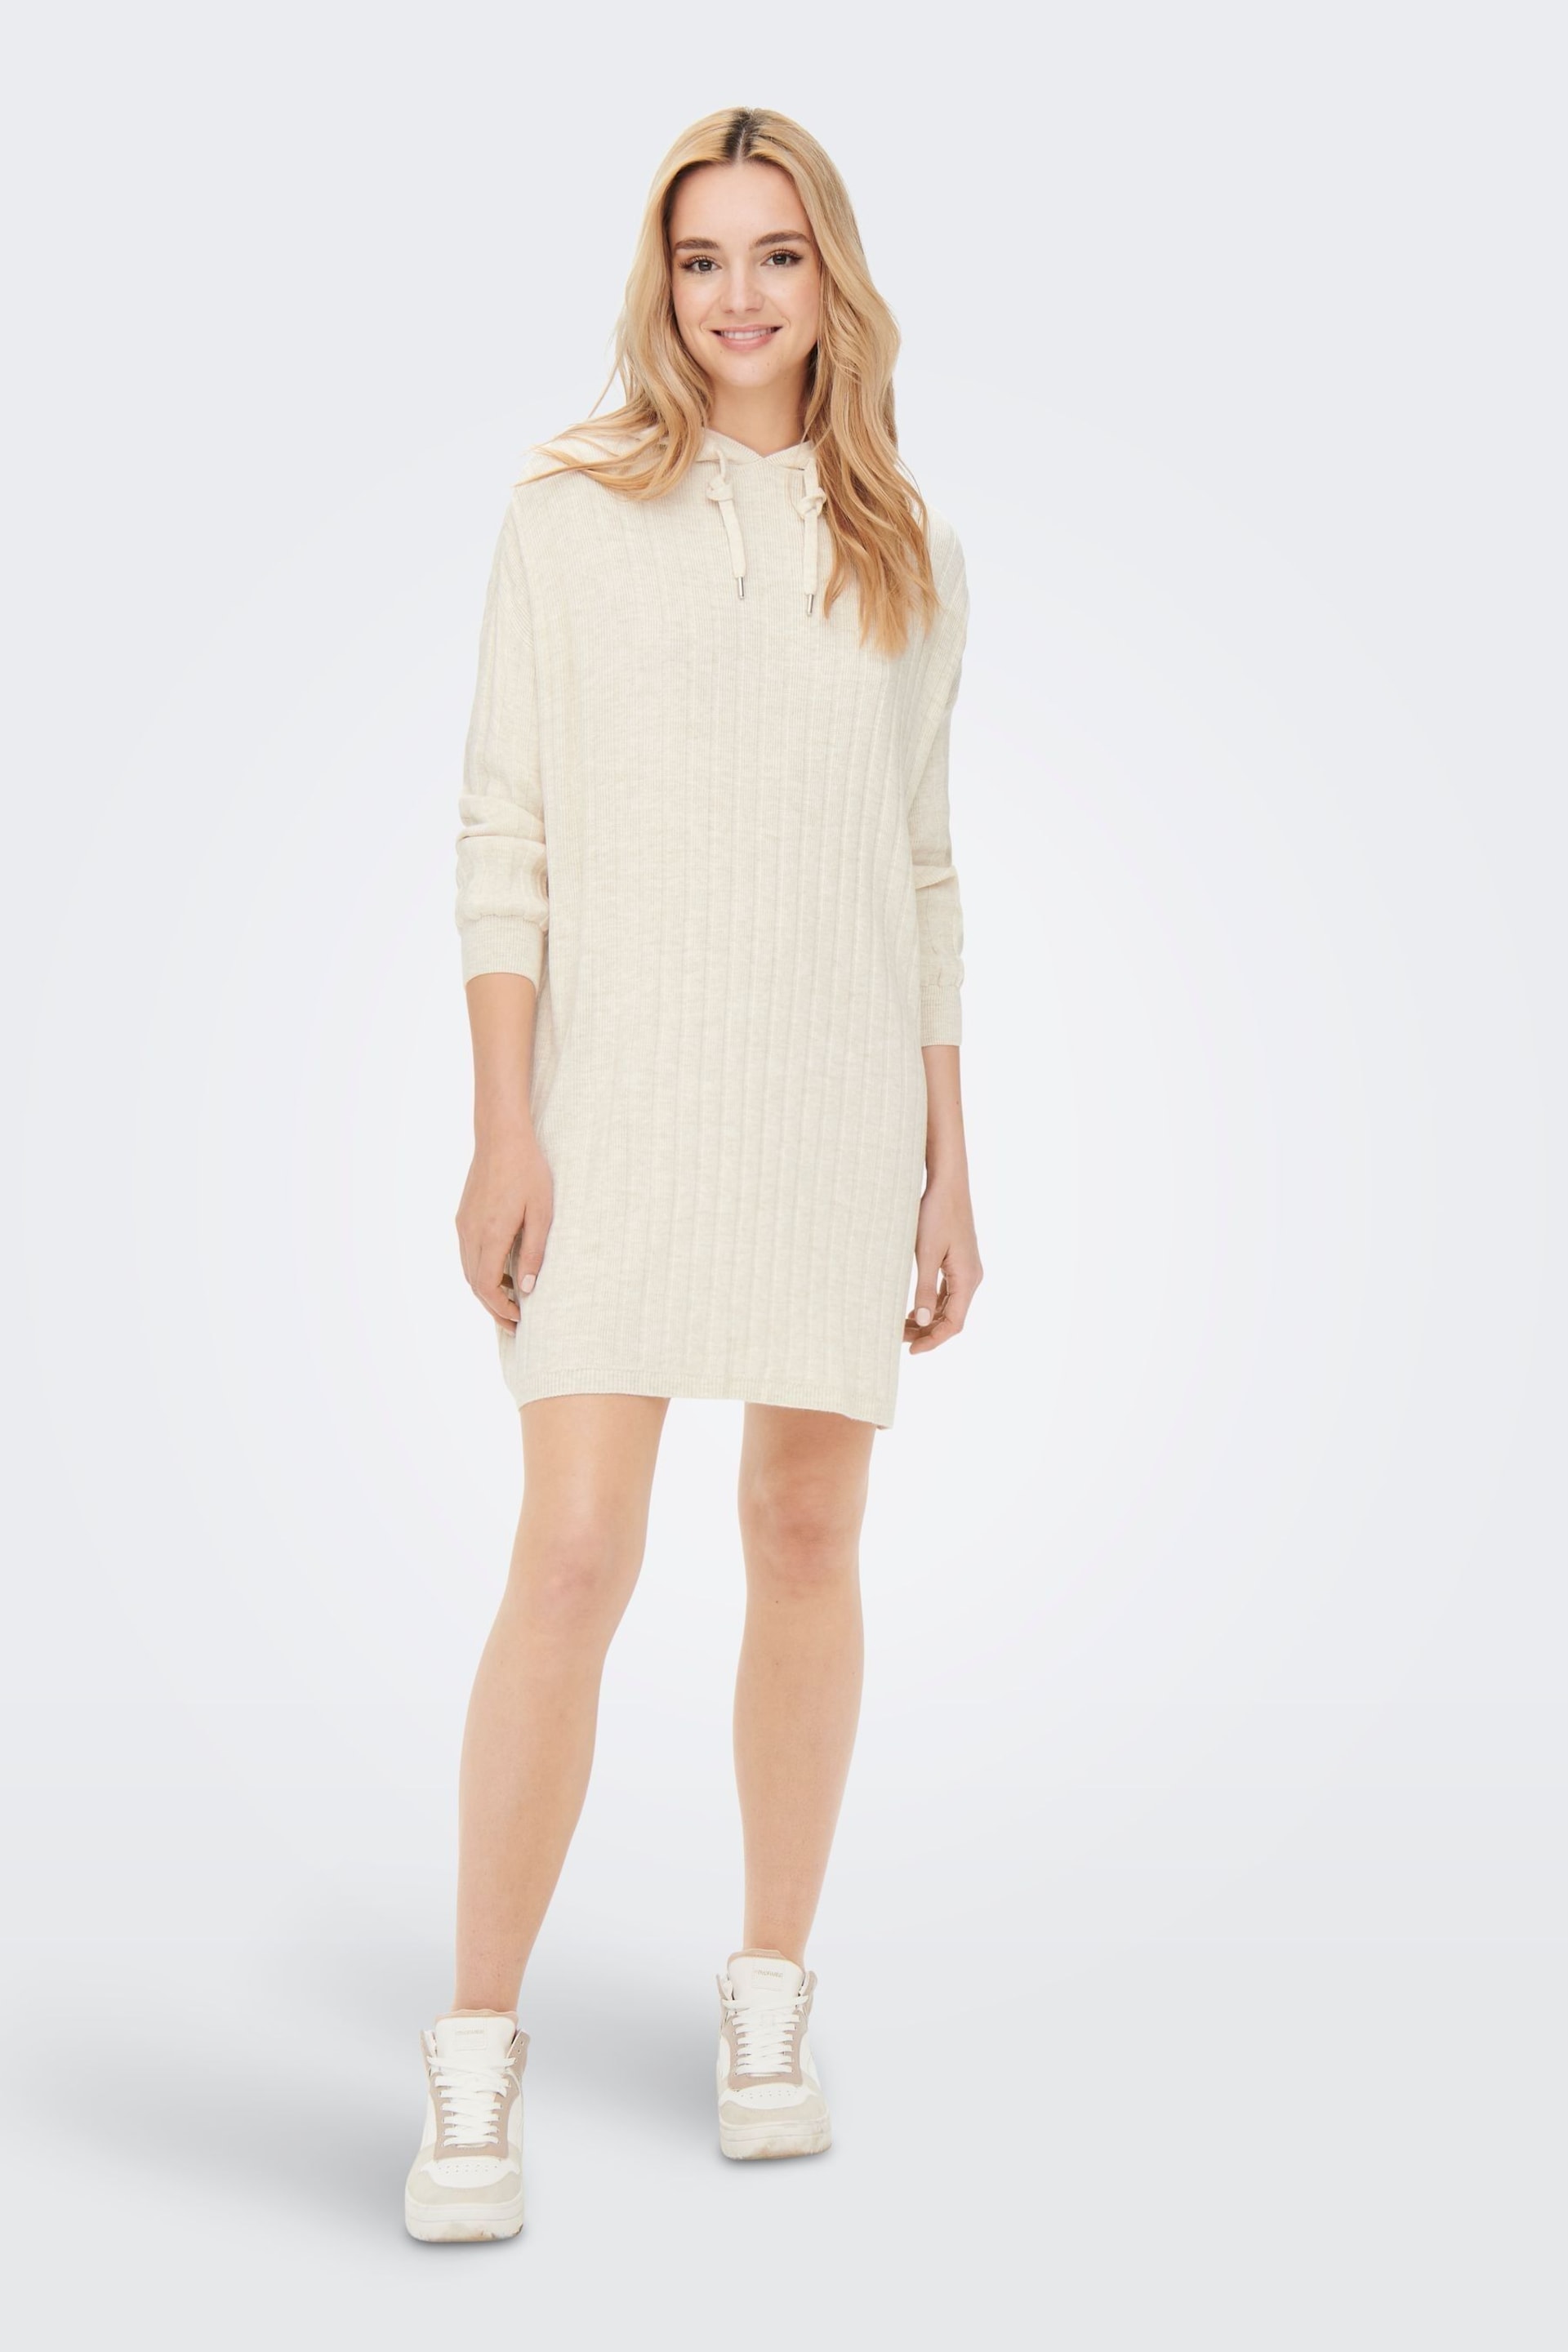 ONLY Cream Knitted Hooded Cosy Lounge Jumper Dress - Image 3 of 6